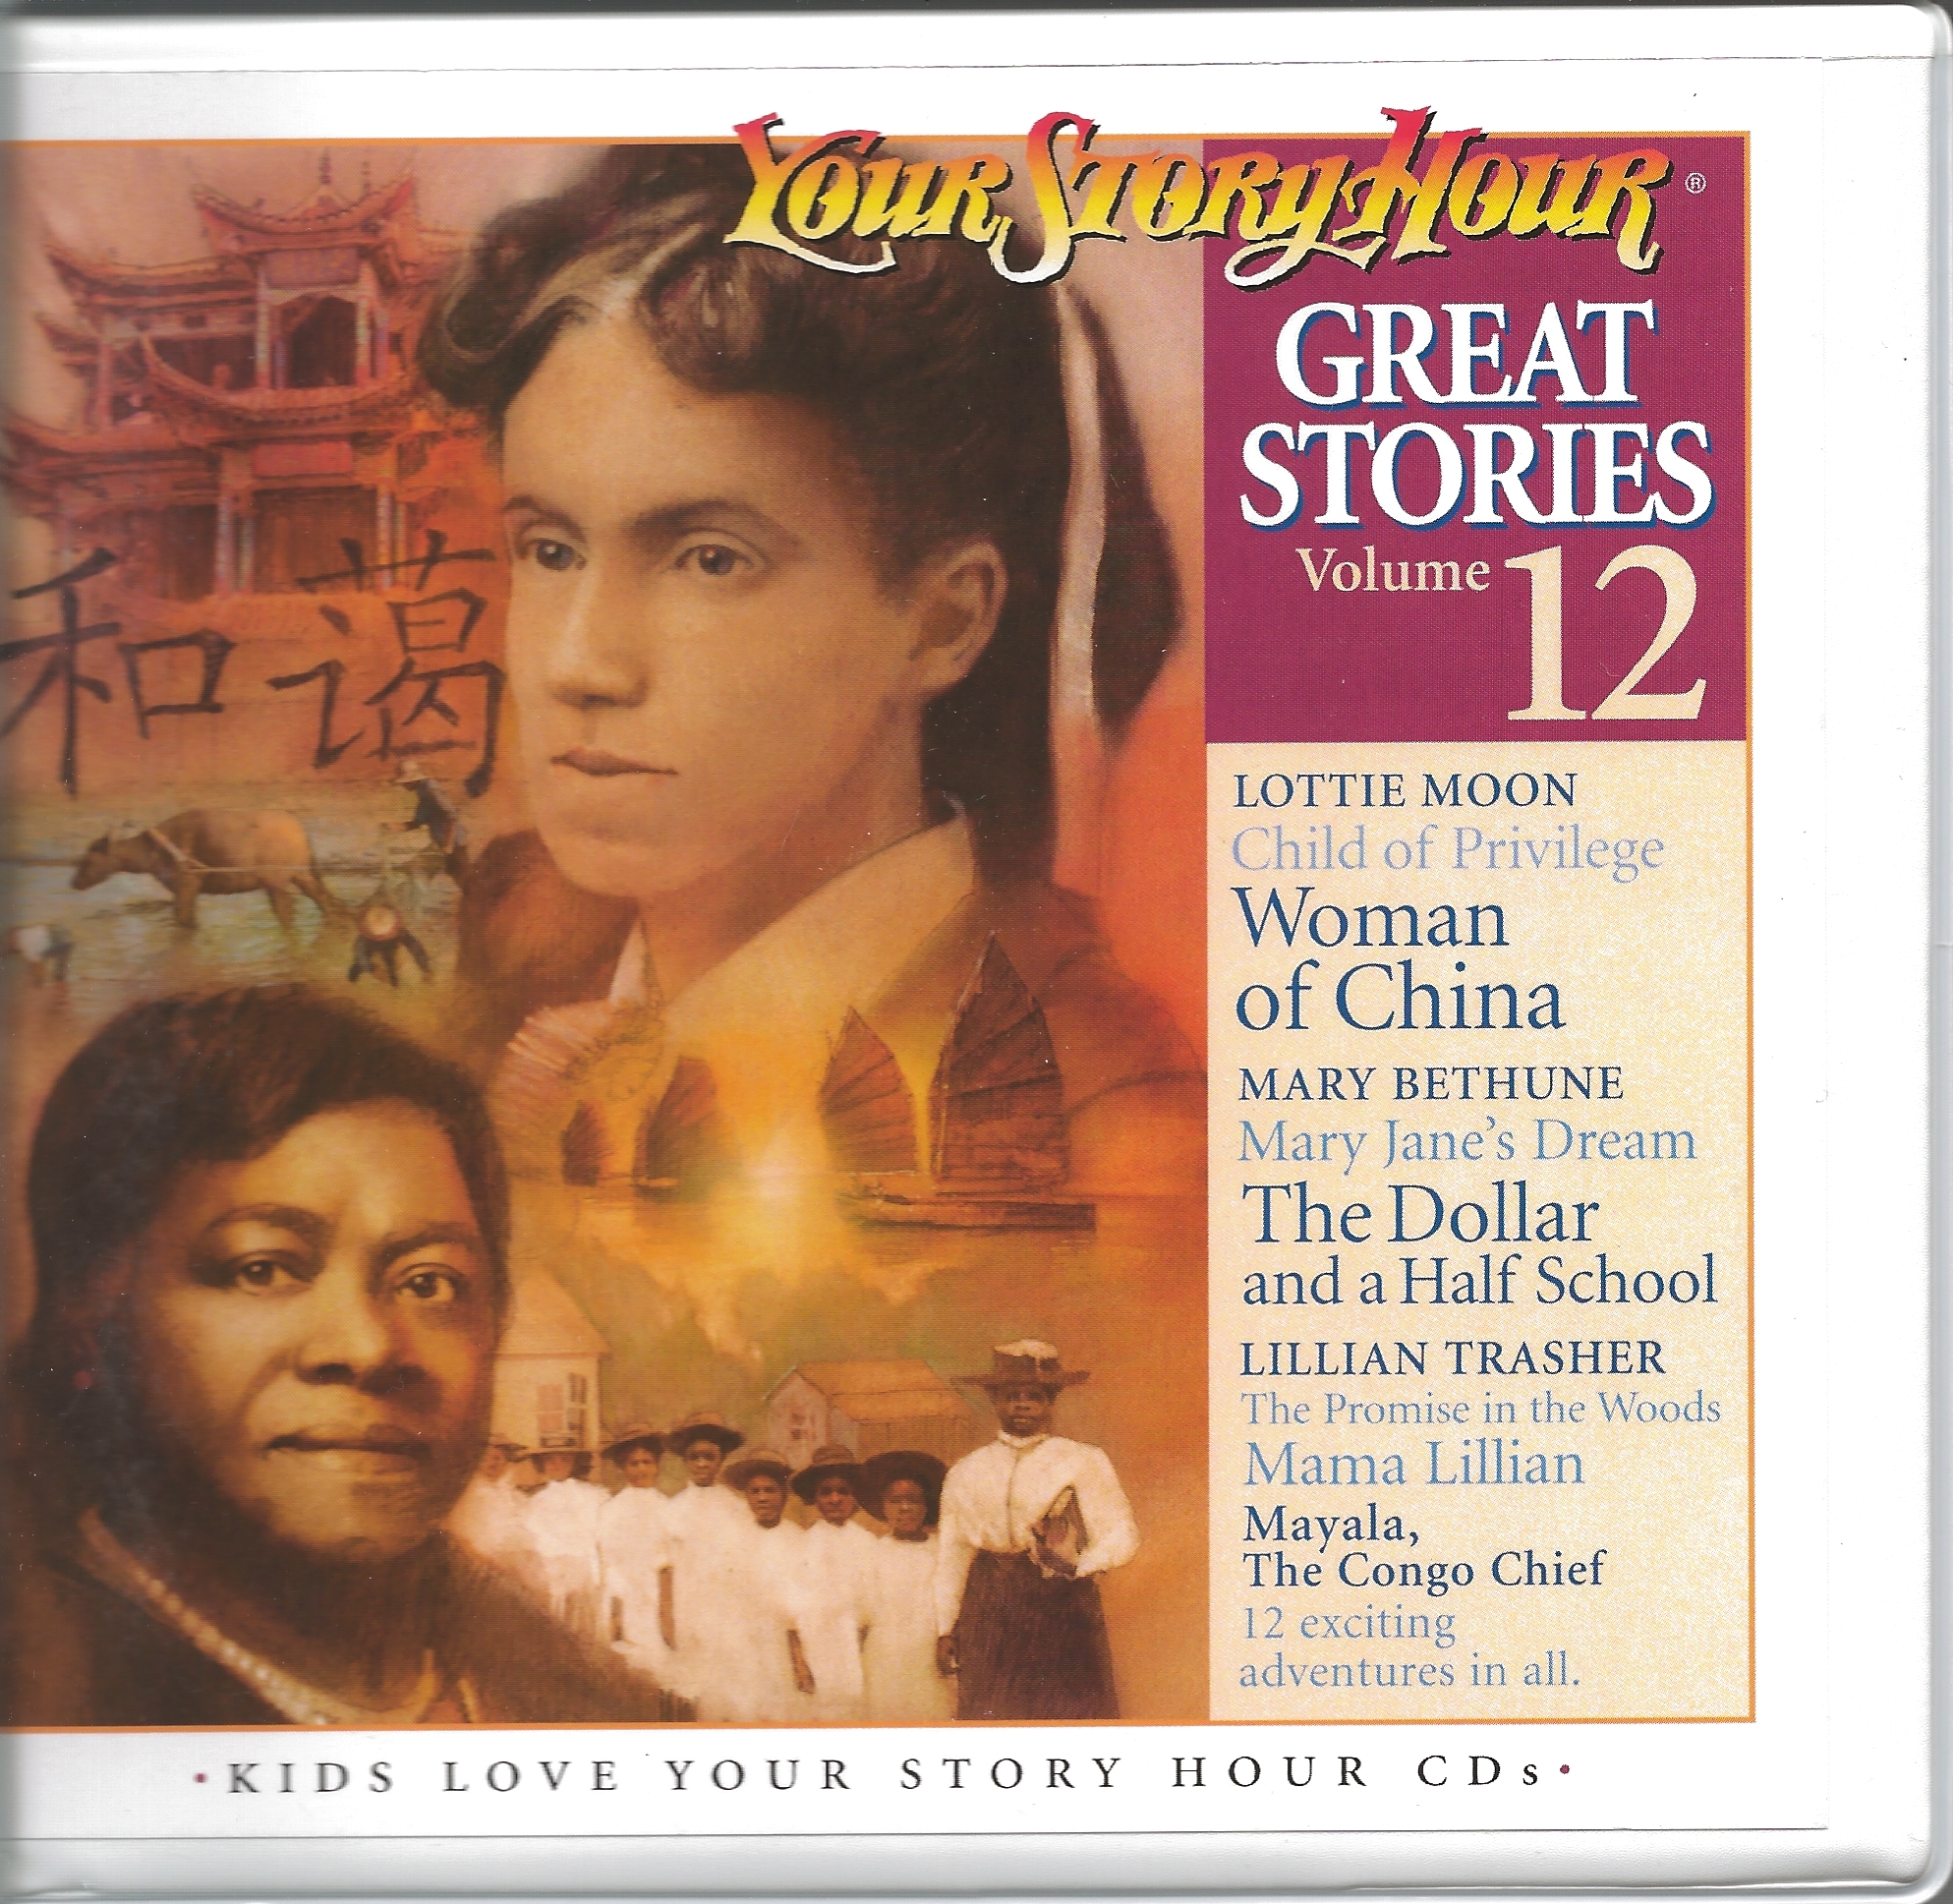 GREAT STORIES VOLUME 12 CD ALBUM Your Story Hour